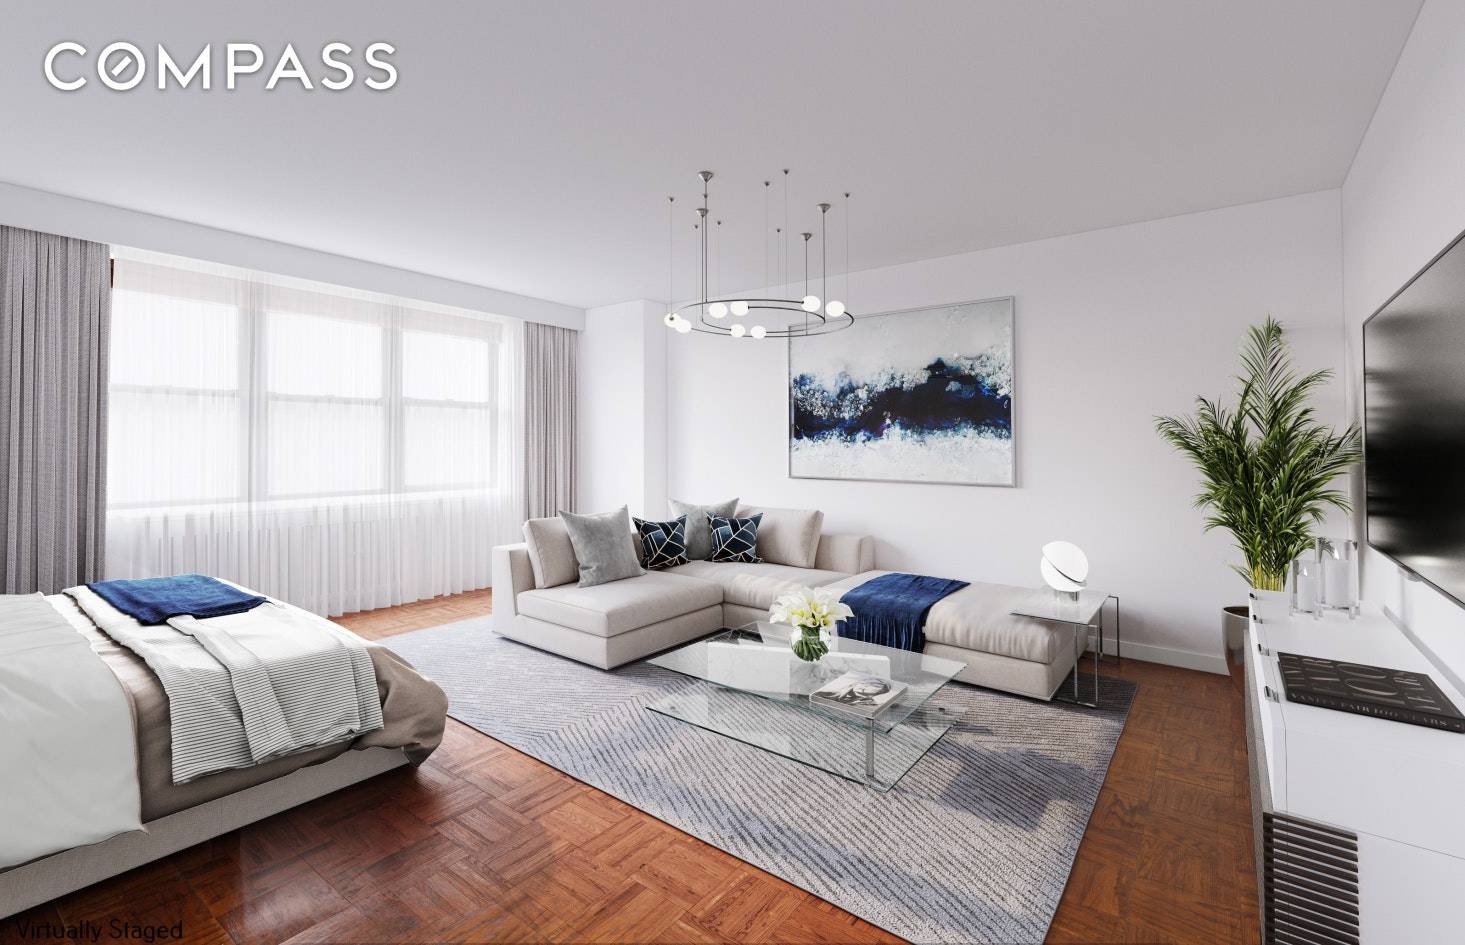 Apartment 12L at 330 Third Avenue is a renovated over sized alcove studio with separate kitchen, dining and dressing area located at the crossroads of Kips Bay, Gramercy, NoMad and ...